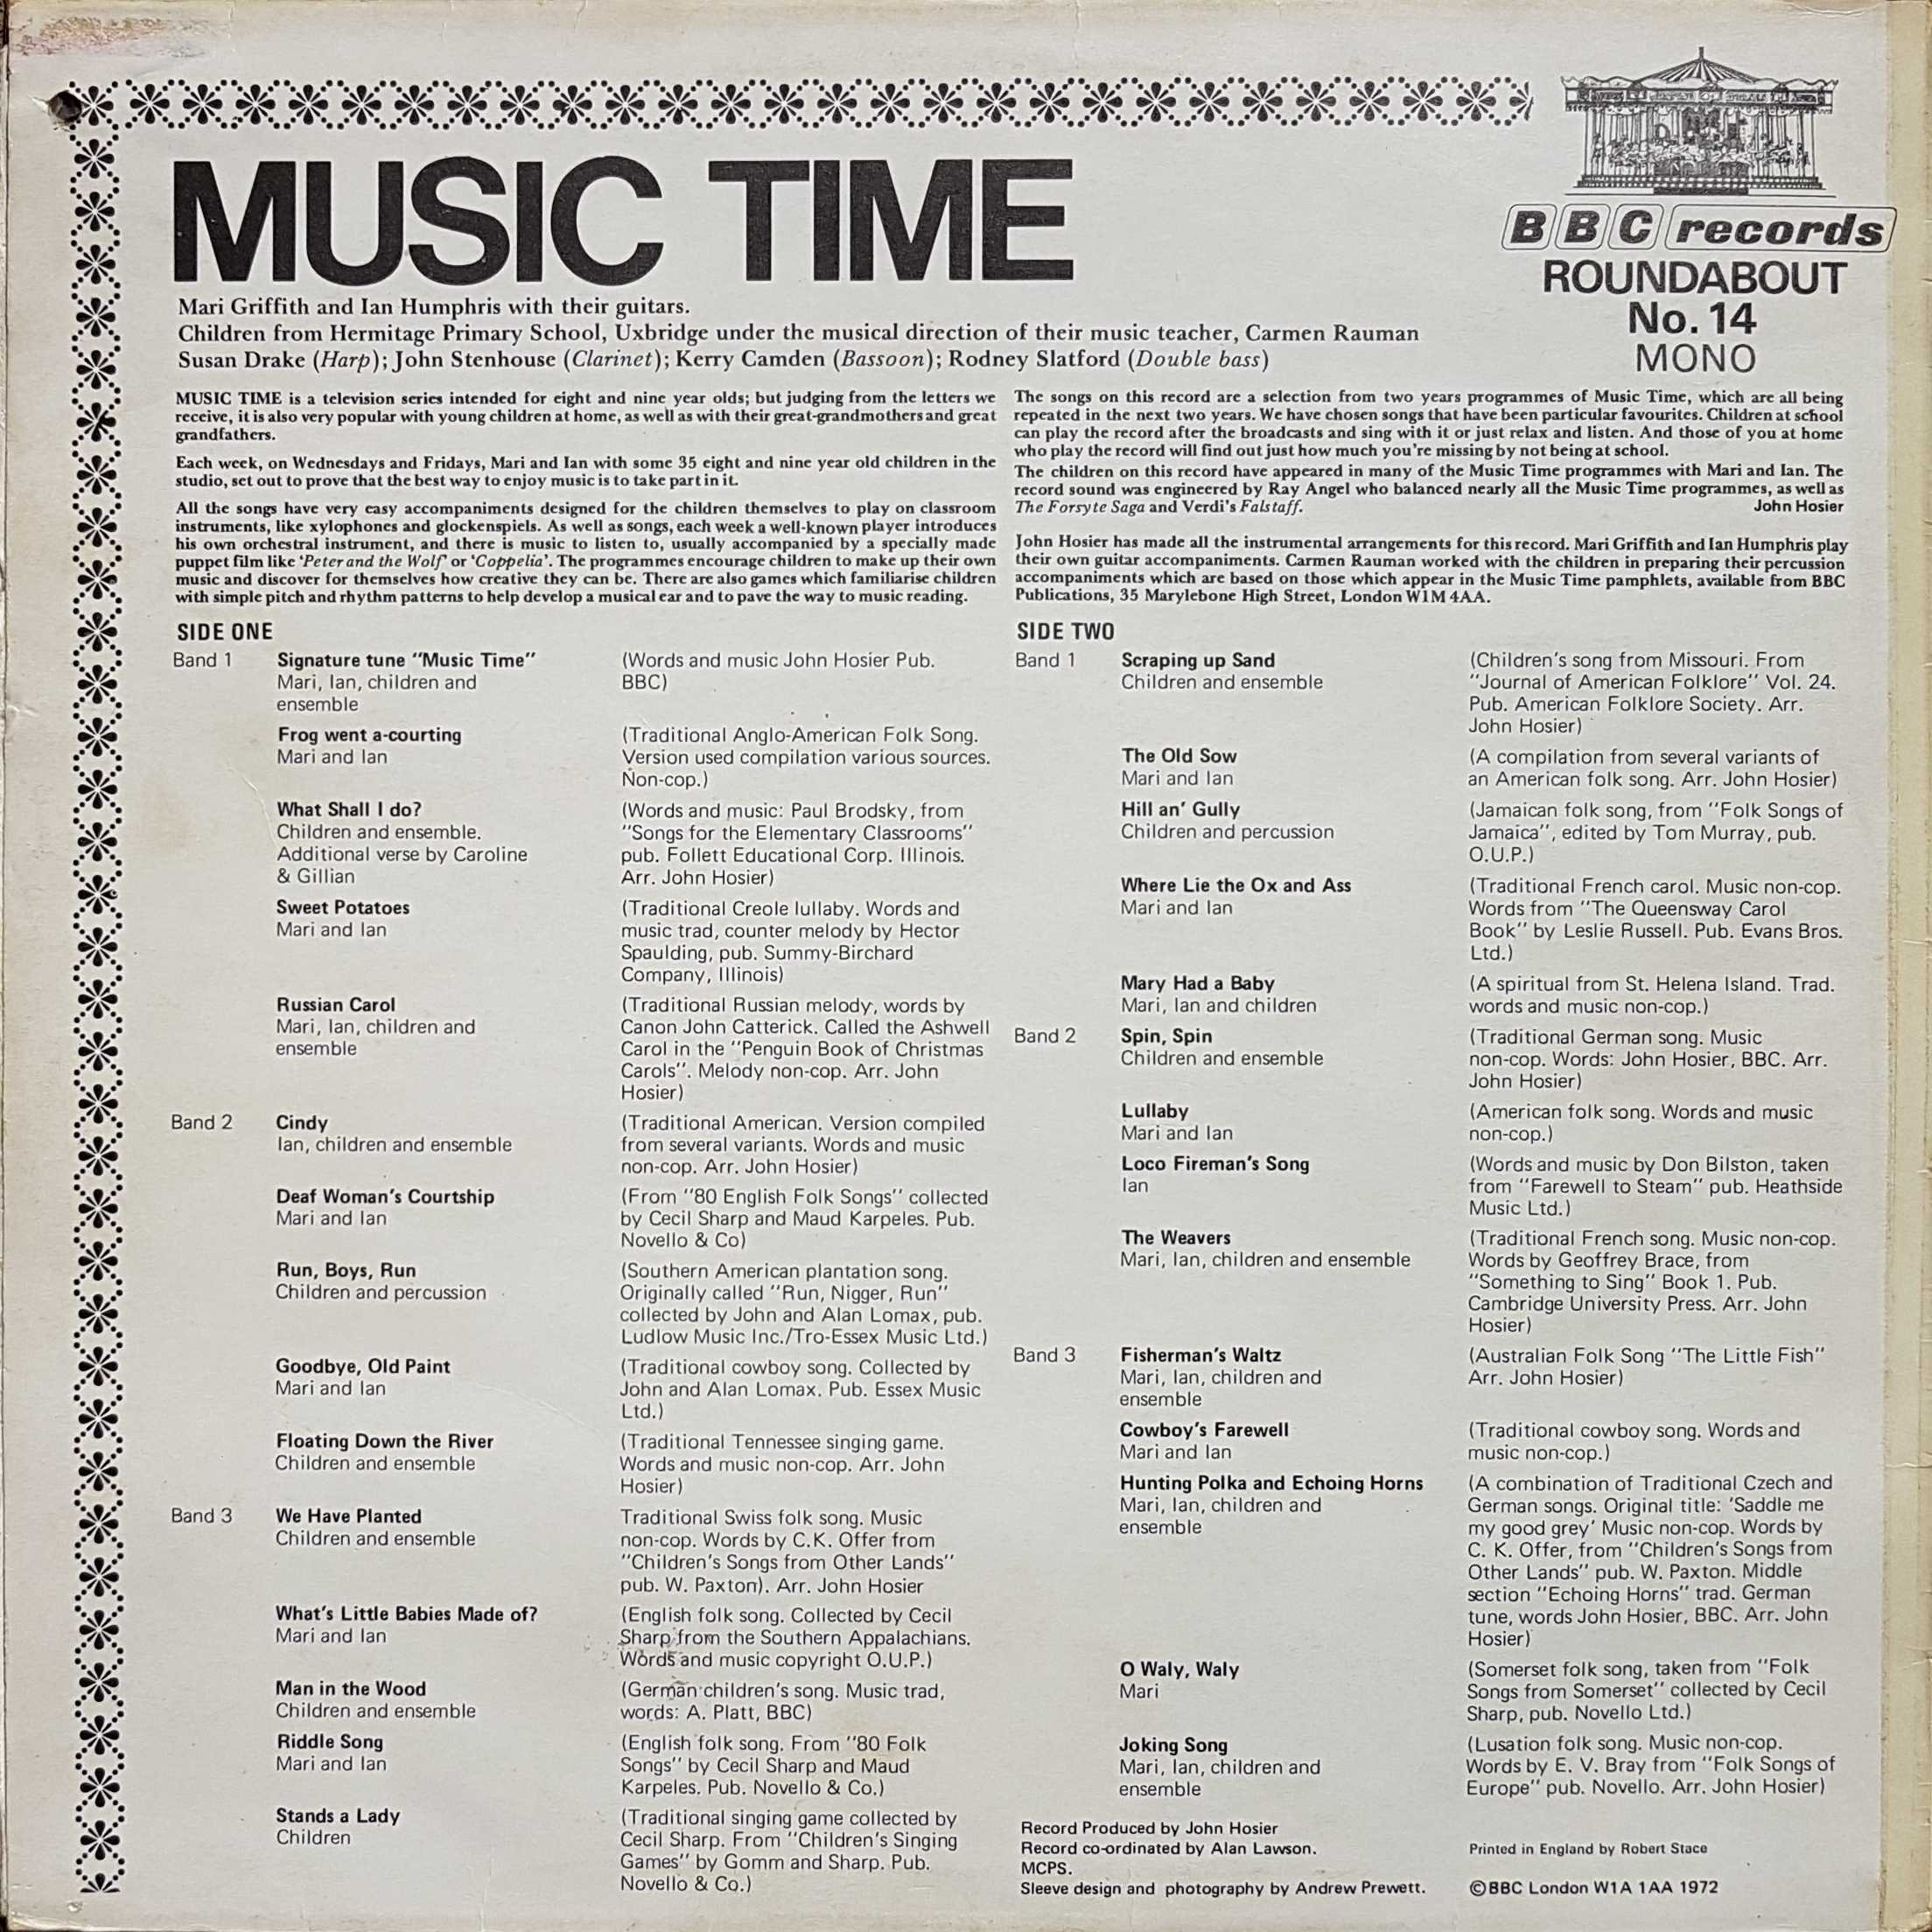 Picture of RBT 14 Music time by artist Mari Griffith / Ian Humphris from the BBC records and Tapes library